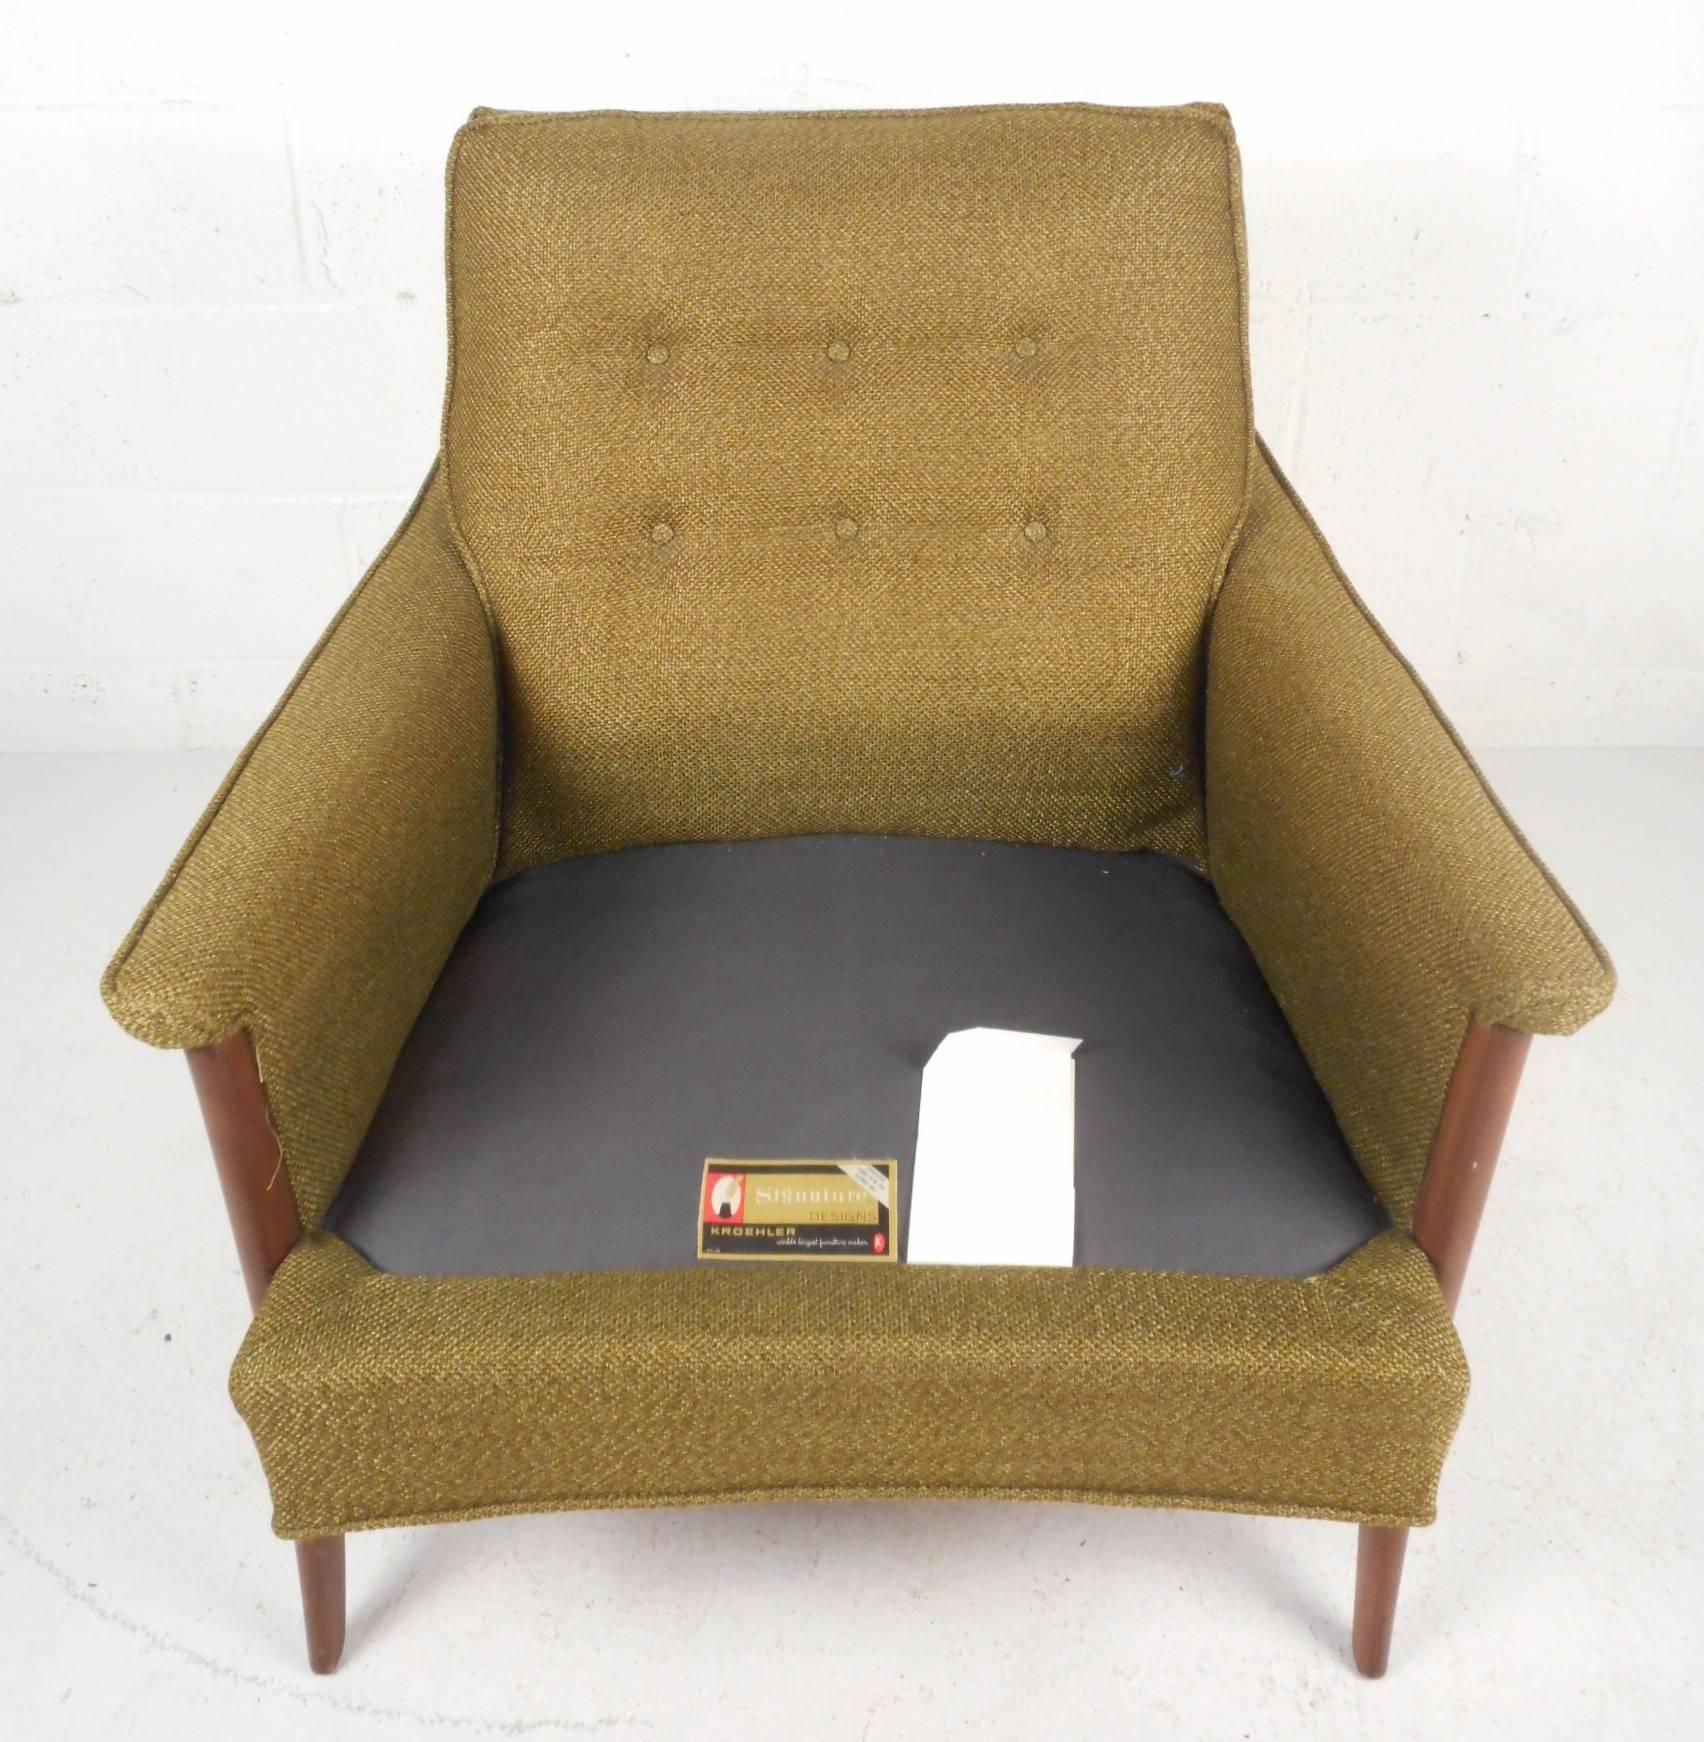 American Mid-Century Modern Tufted Lounge Chair by Kroehler Mfg Co